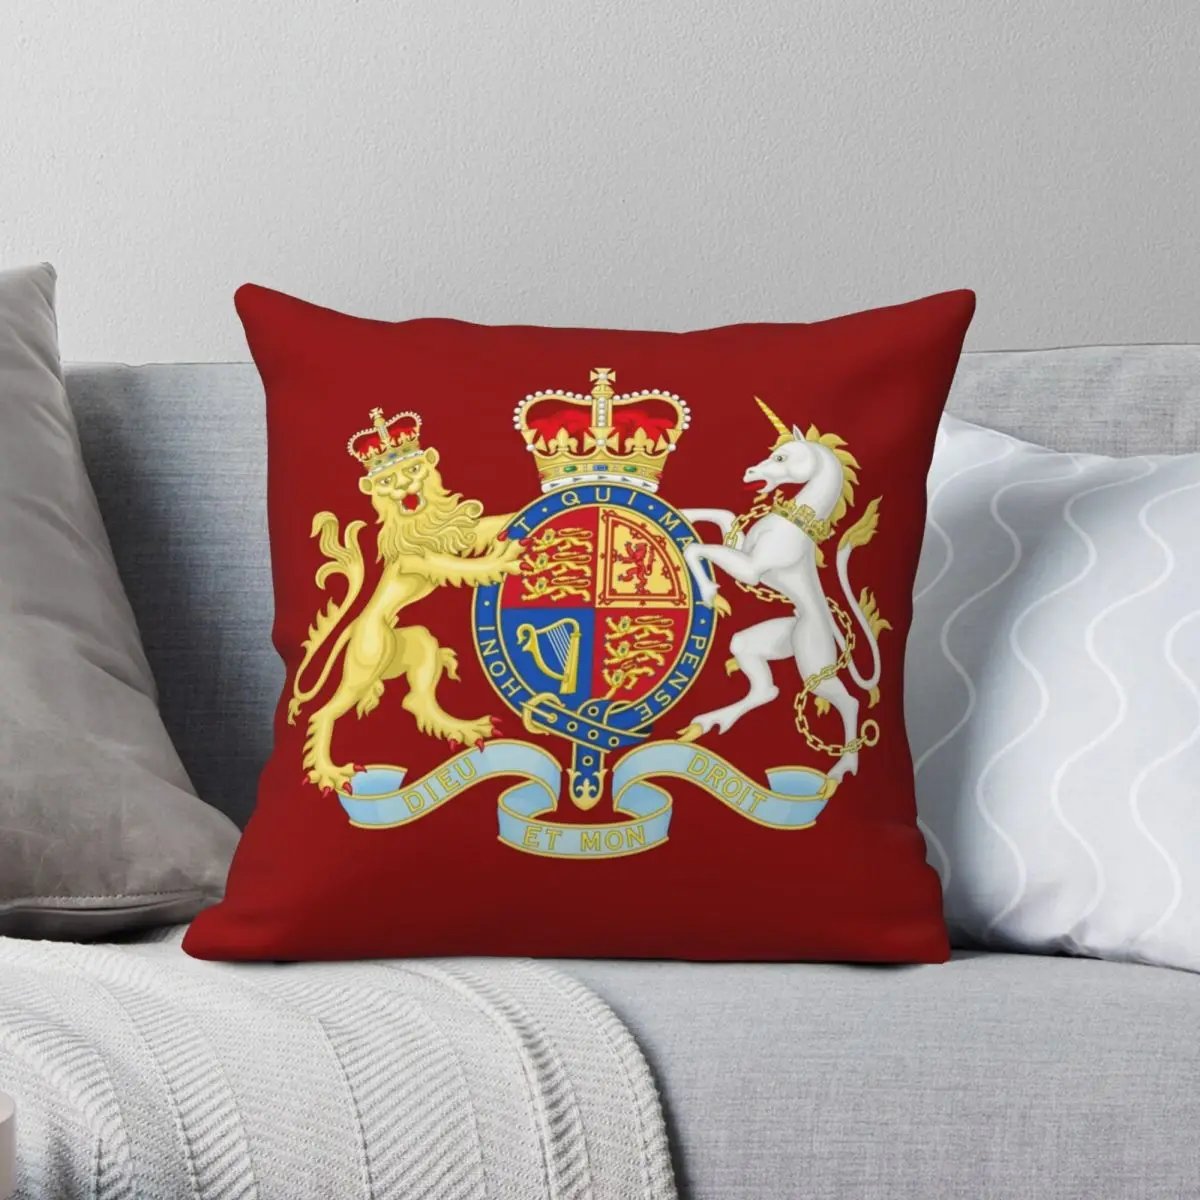 

Royal Coat Of Arms Of The United Kingdom Pillowcase Polyester Linen Printed Zip Decor Throw Pillow Case Sofa Cover